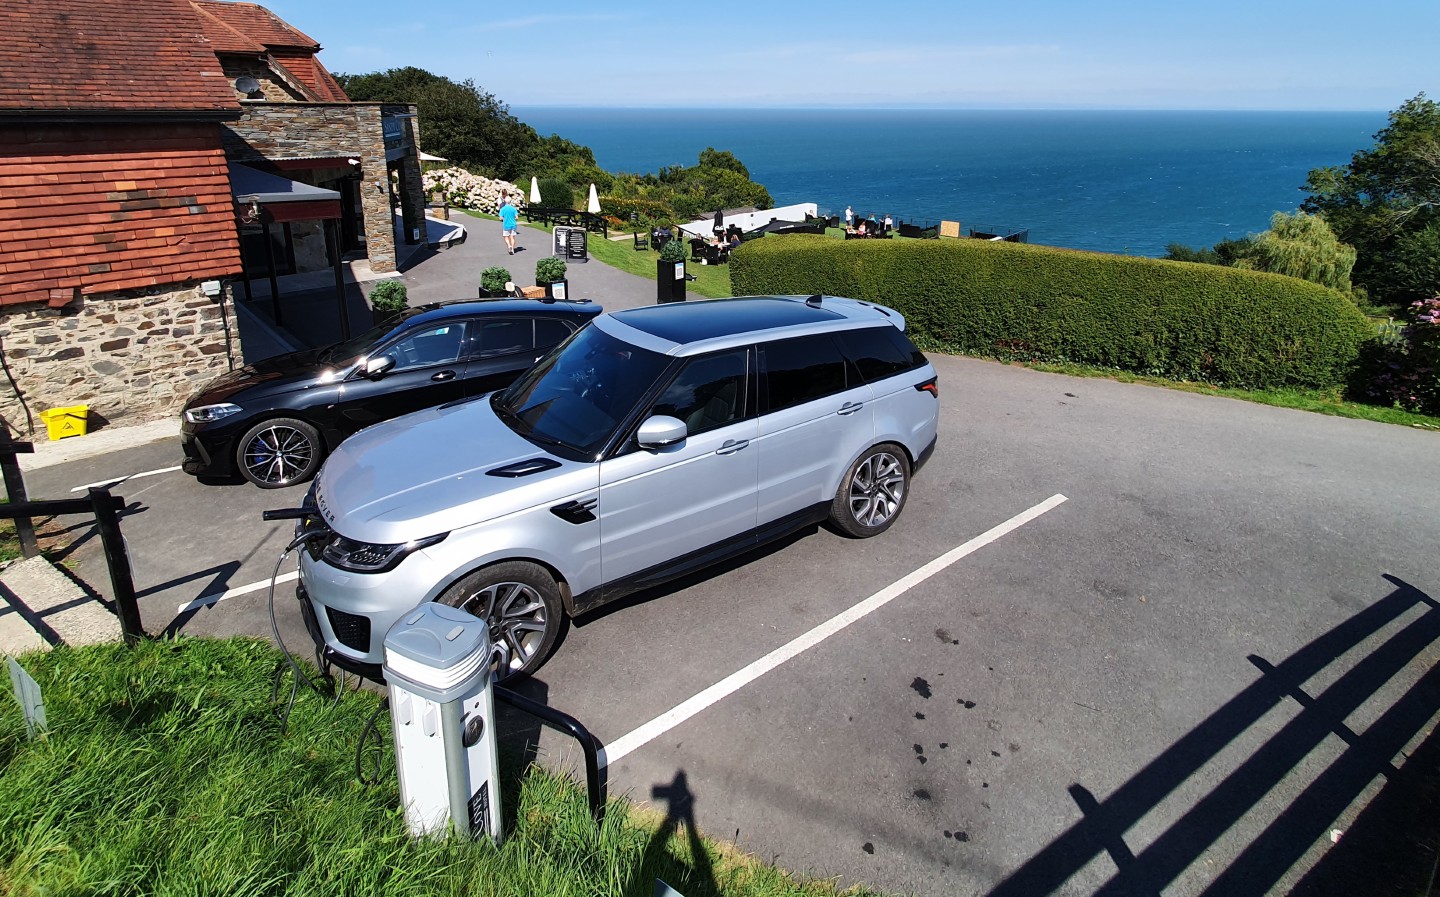 Charging a plug-in hybrid car at Sandy Cove hotel - Range Rover Sport P400e plug-in hybrid 2020 beach sunset scene - long-term test review by Will Dron